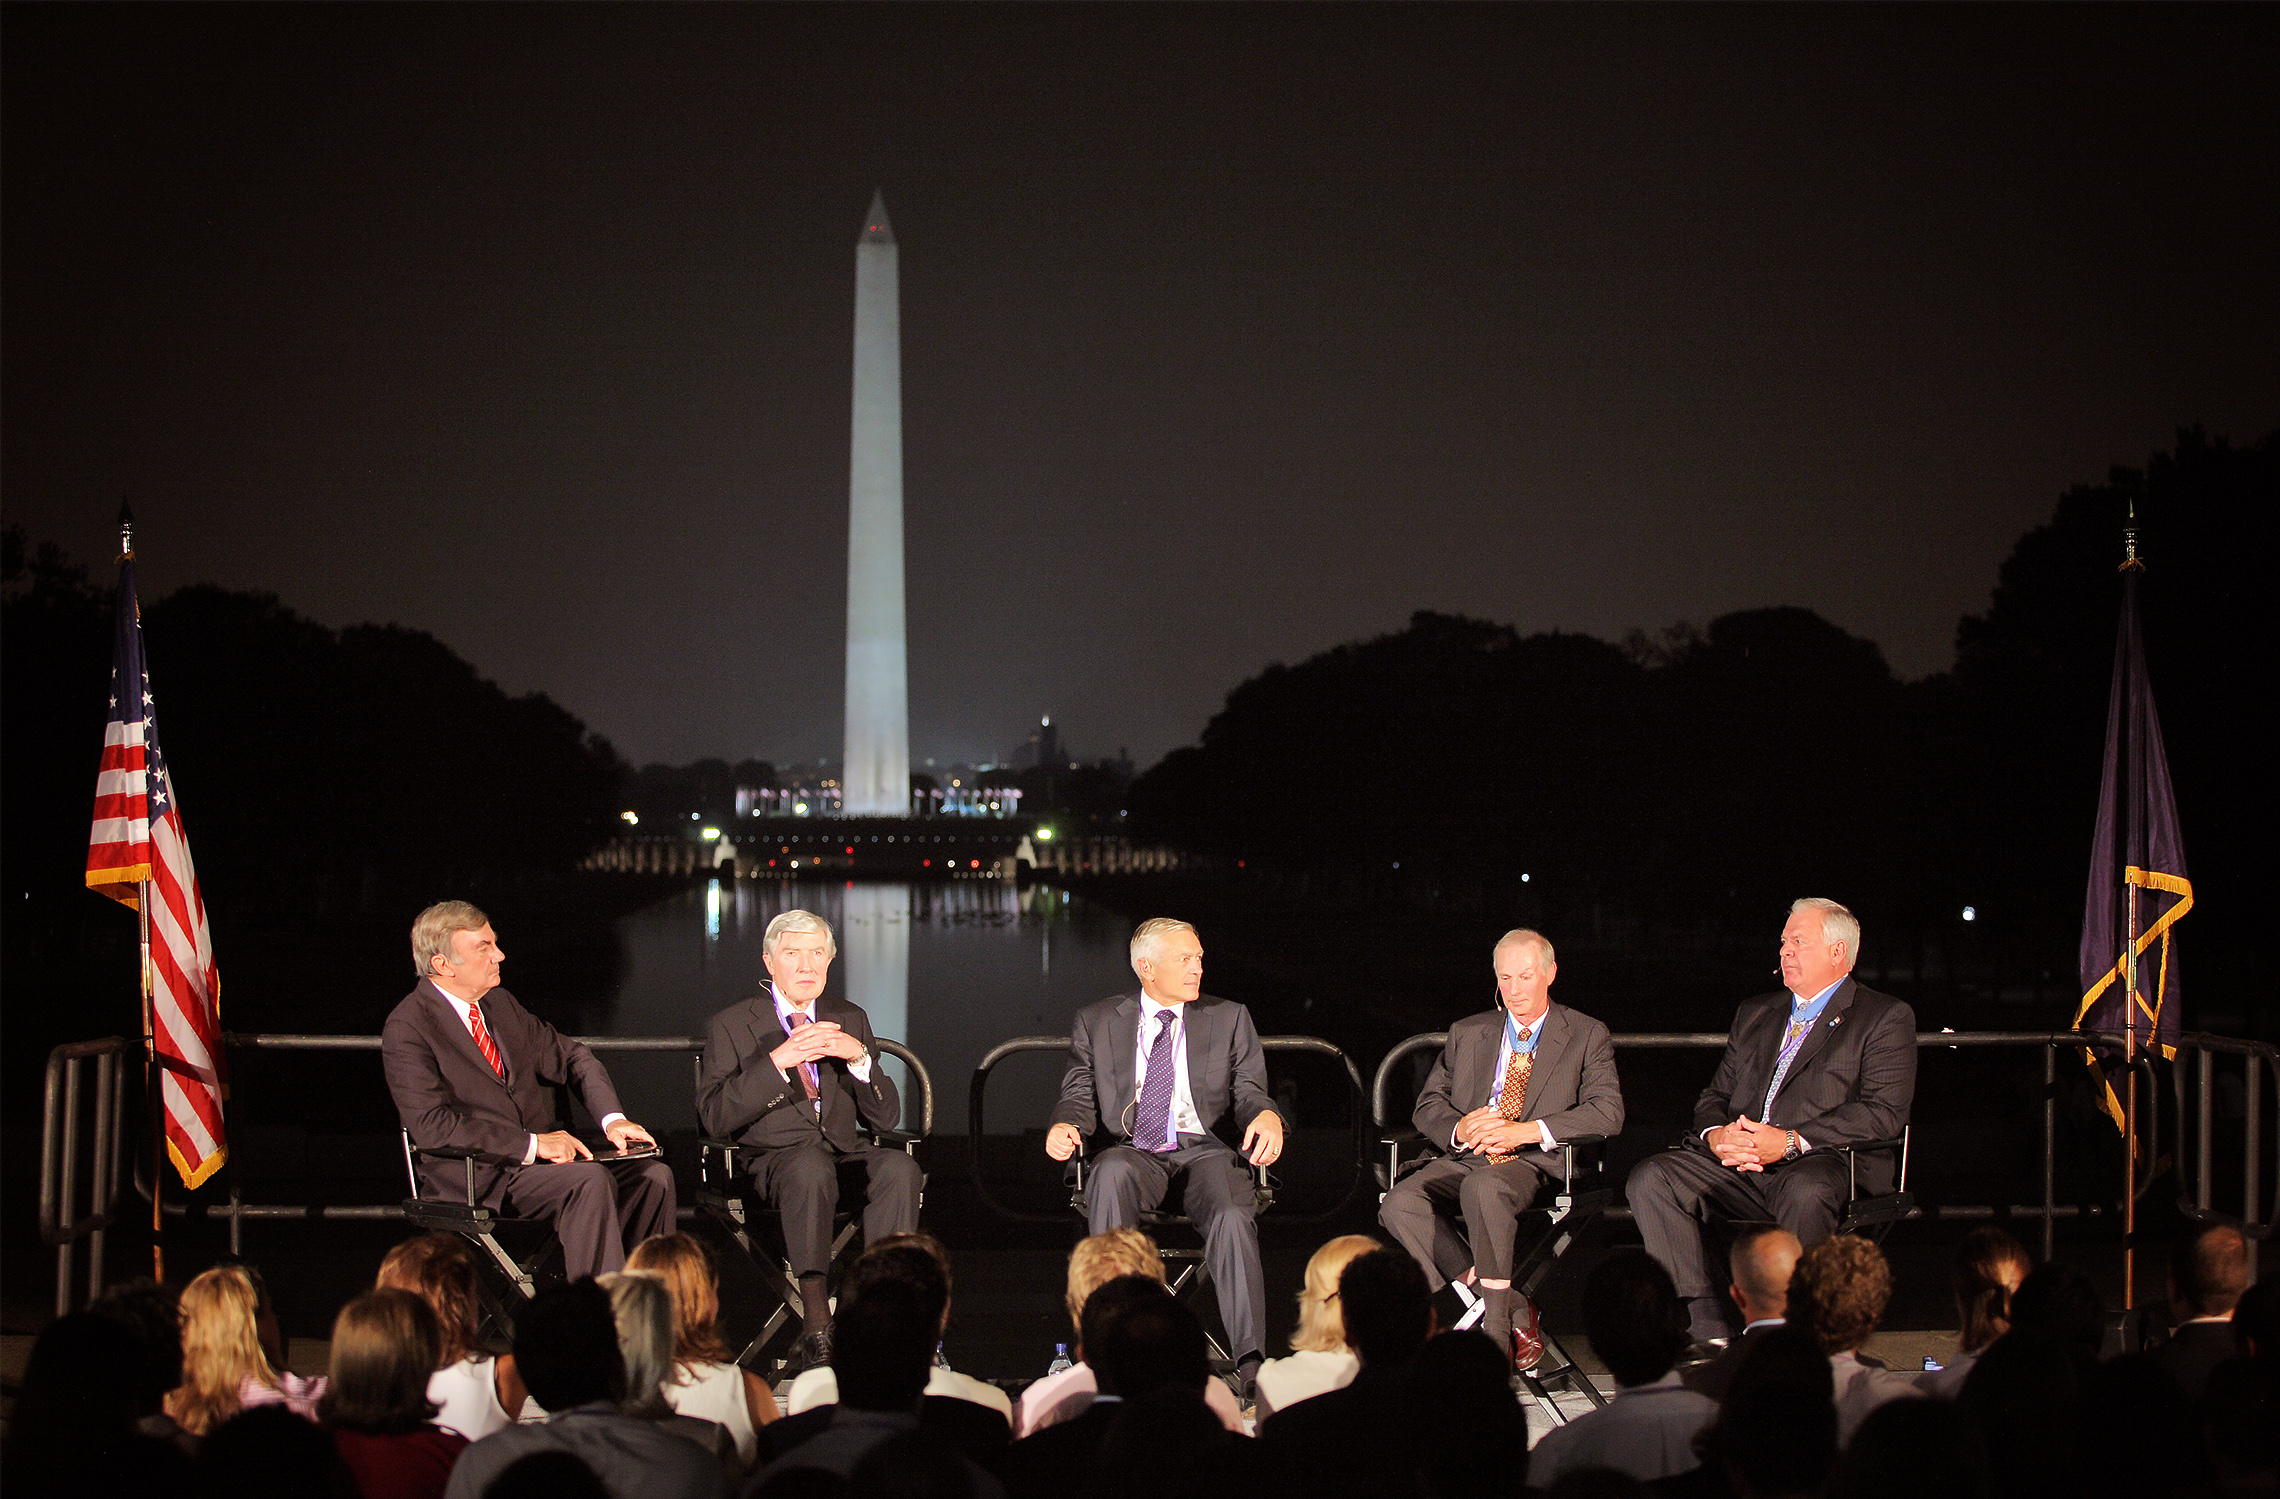 Journalists Sam Donaldson and Neil Sheehan, General Wesley Clark, and Medal of Honor recipients Tommy Norris and Michael Thornton discuss the lessons of the Vietnam War in a session among the monuments of Washington.